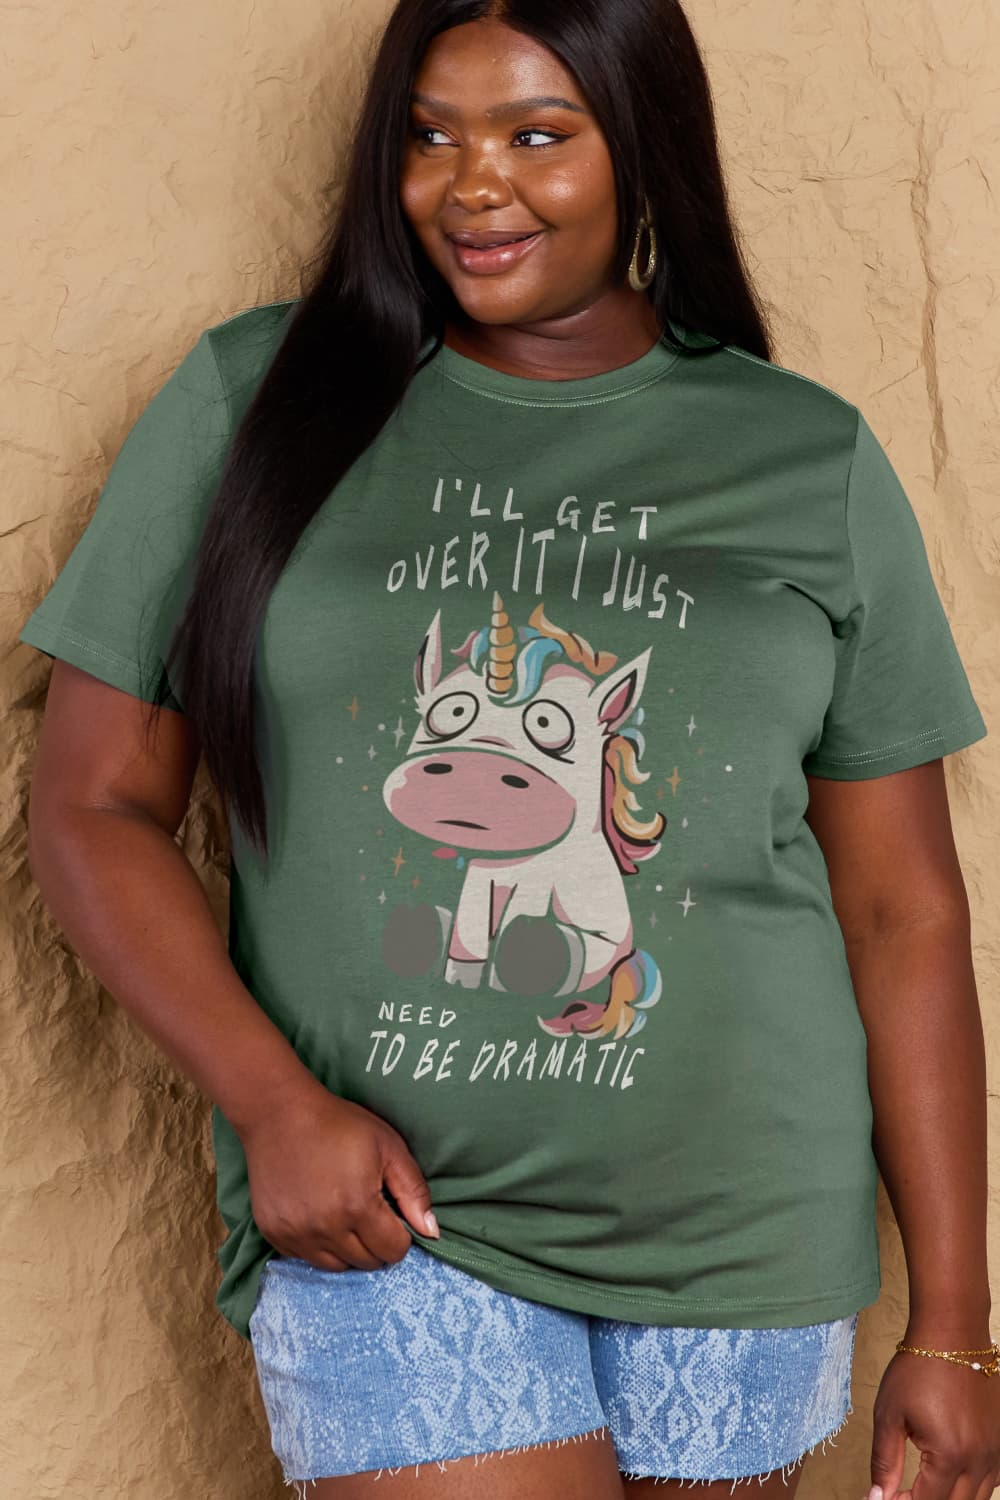 Full Size I’LL GET OVER IT I JUST NEED TO BE DRAMATIC Graphic Cotton Tee - Green / S - T-Shirts - Shirts & Tops - 19